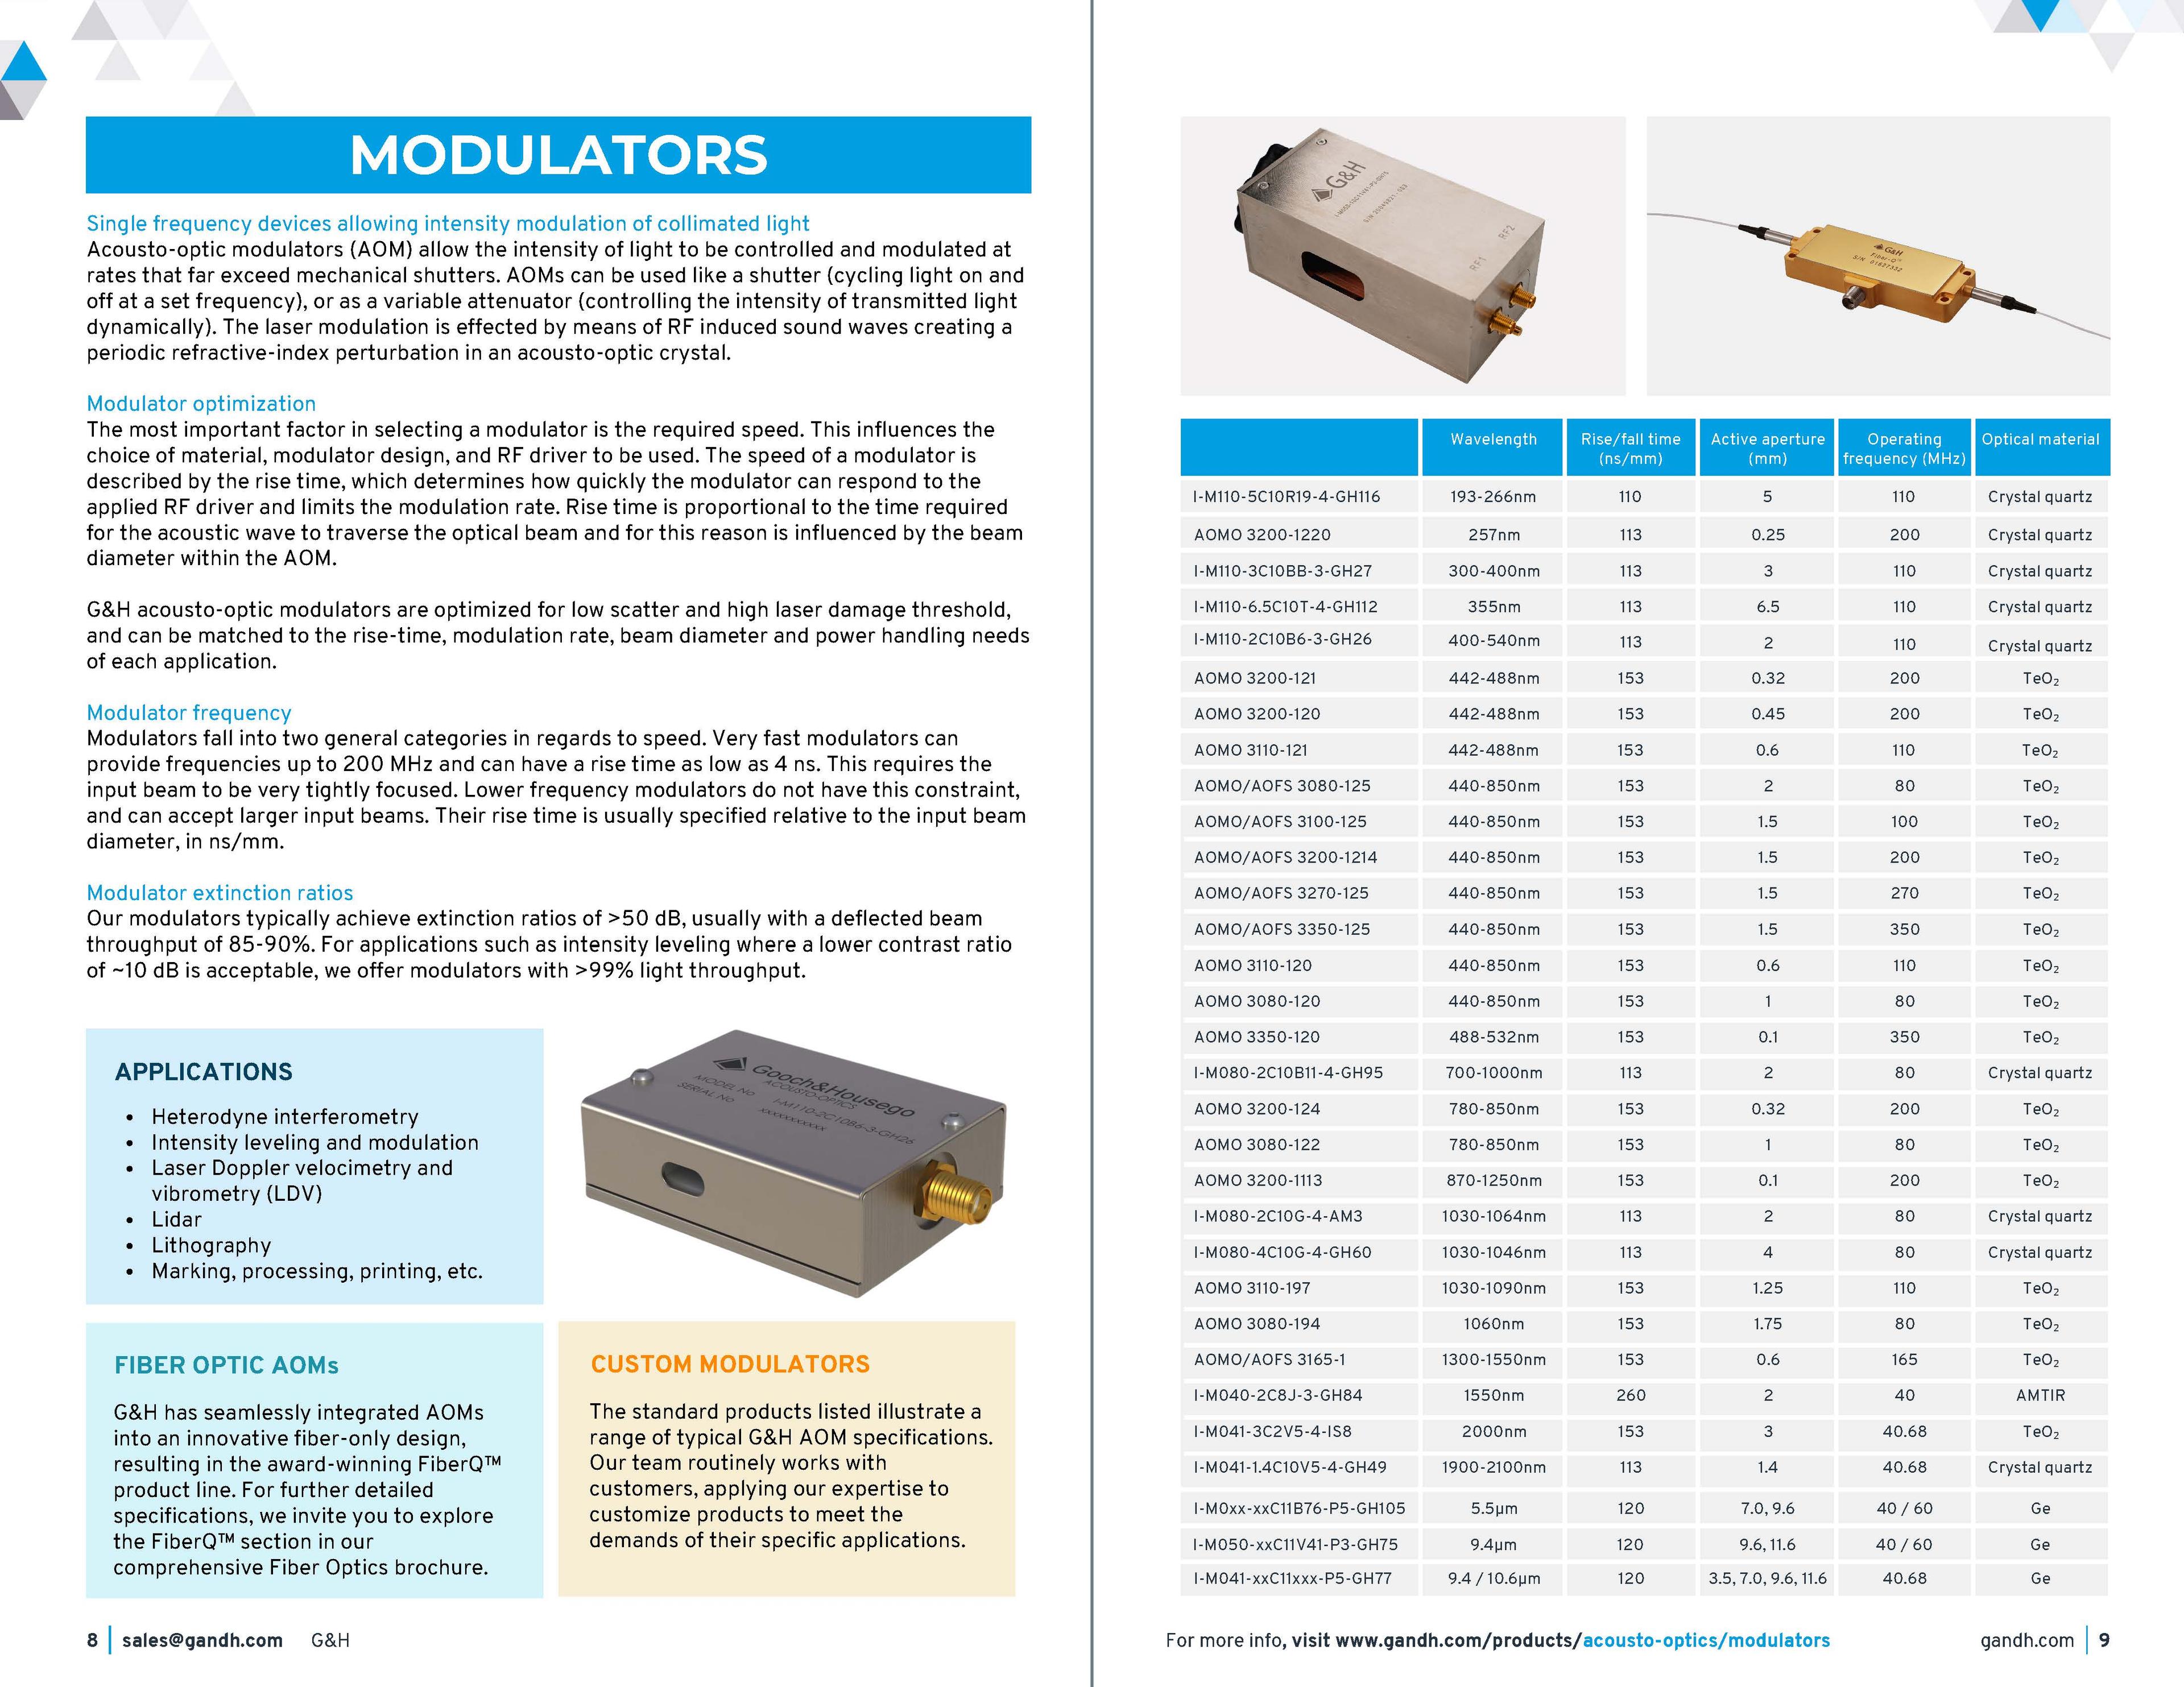 G&H Product & Solutions Guide - Acousto-Optics Page 08-09